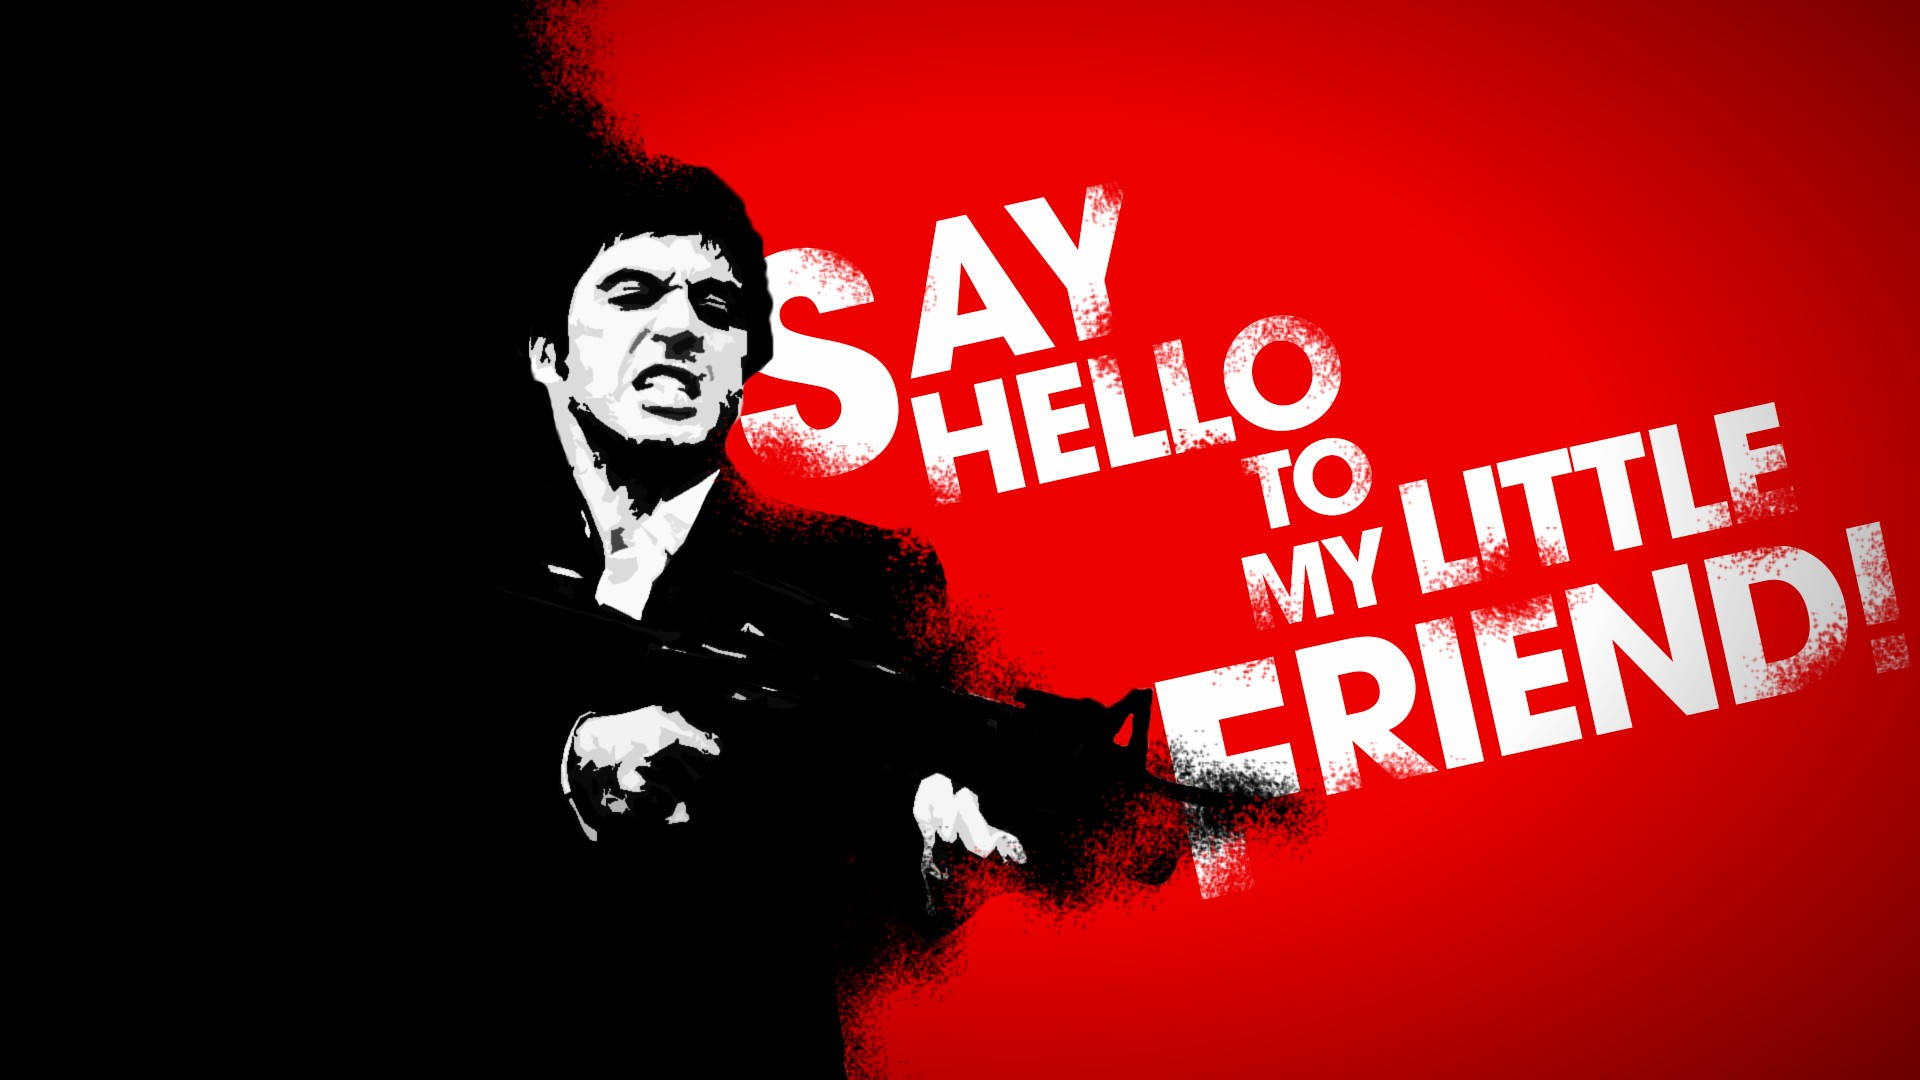 Al Pacino Scarface Red And Black Wallpaper